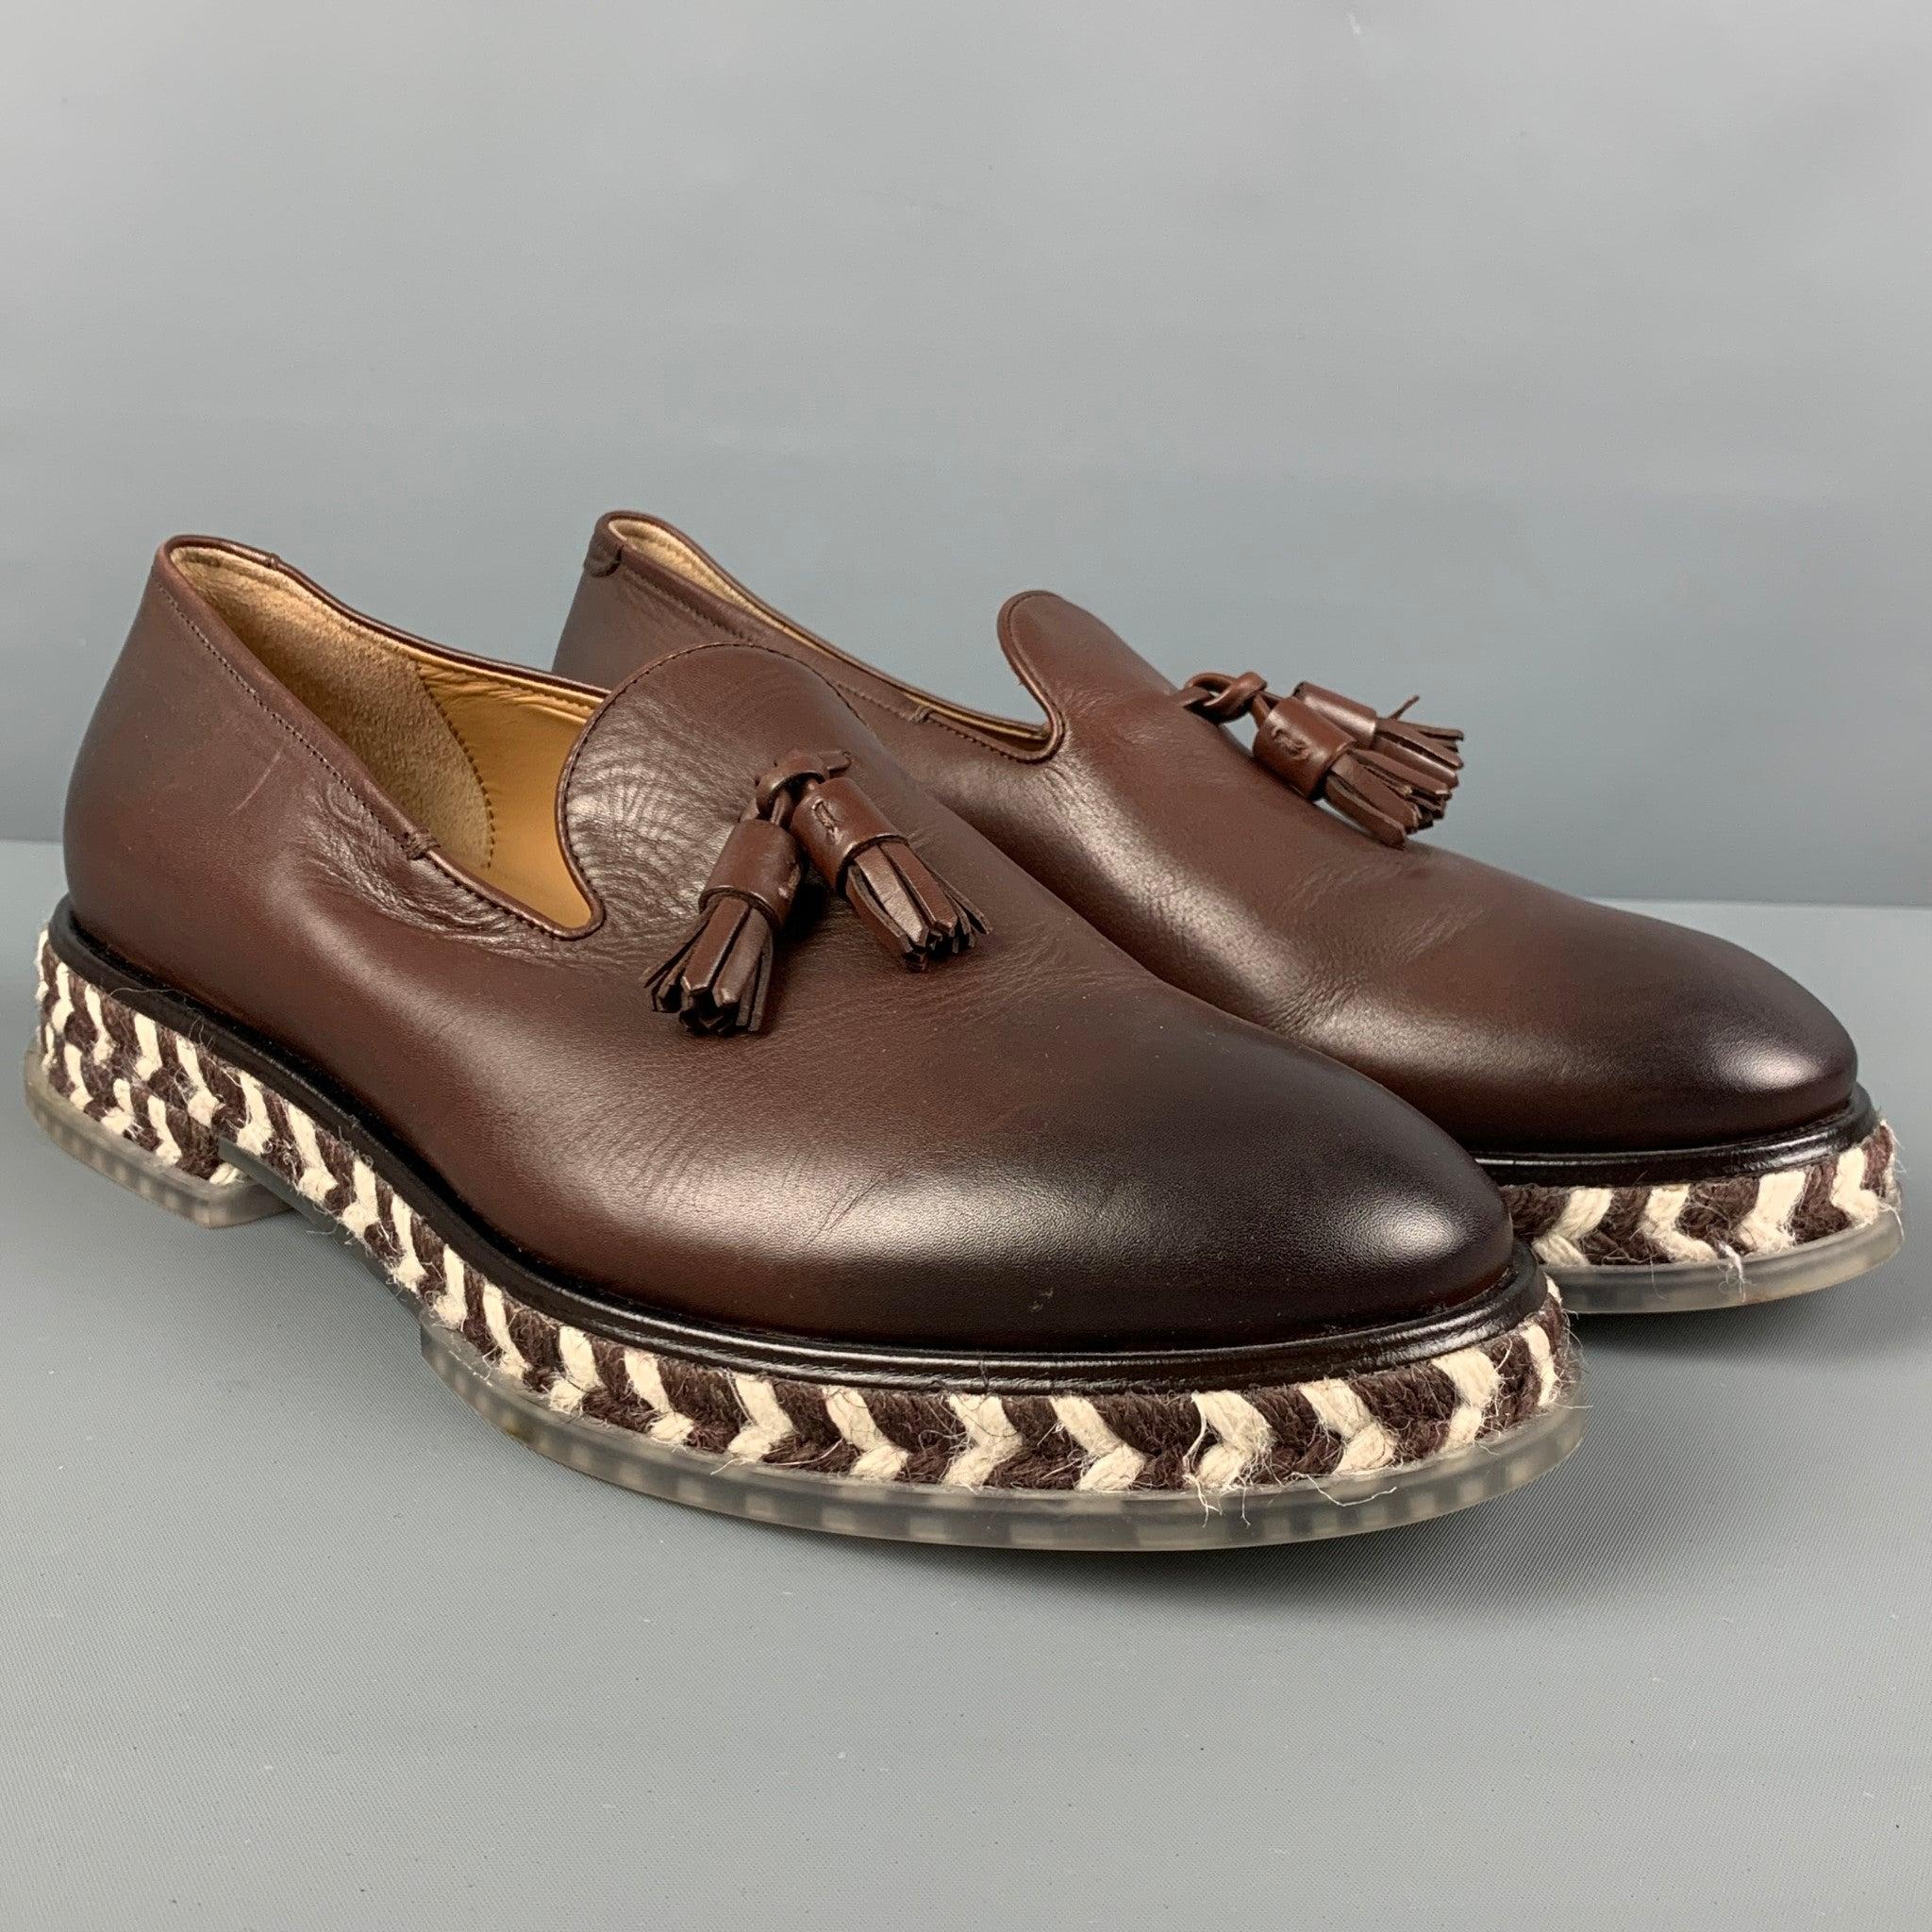 GIORGIO ARMANI loafers comes in a brown antique leather featuring a slip on style, tassel details, jute rope trim, and a rubber sole. Made in Italy.
Very Good
Pre-Owned Condition. 

Marked:   X2J1153 8.5Outsole: 12.25 inches  4.5 inches 
  
  
